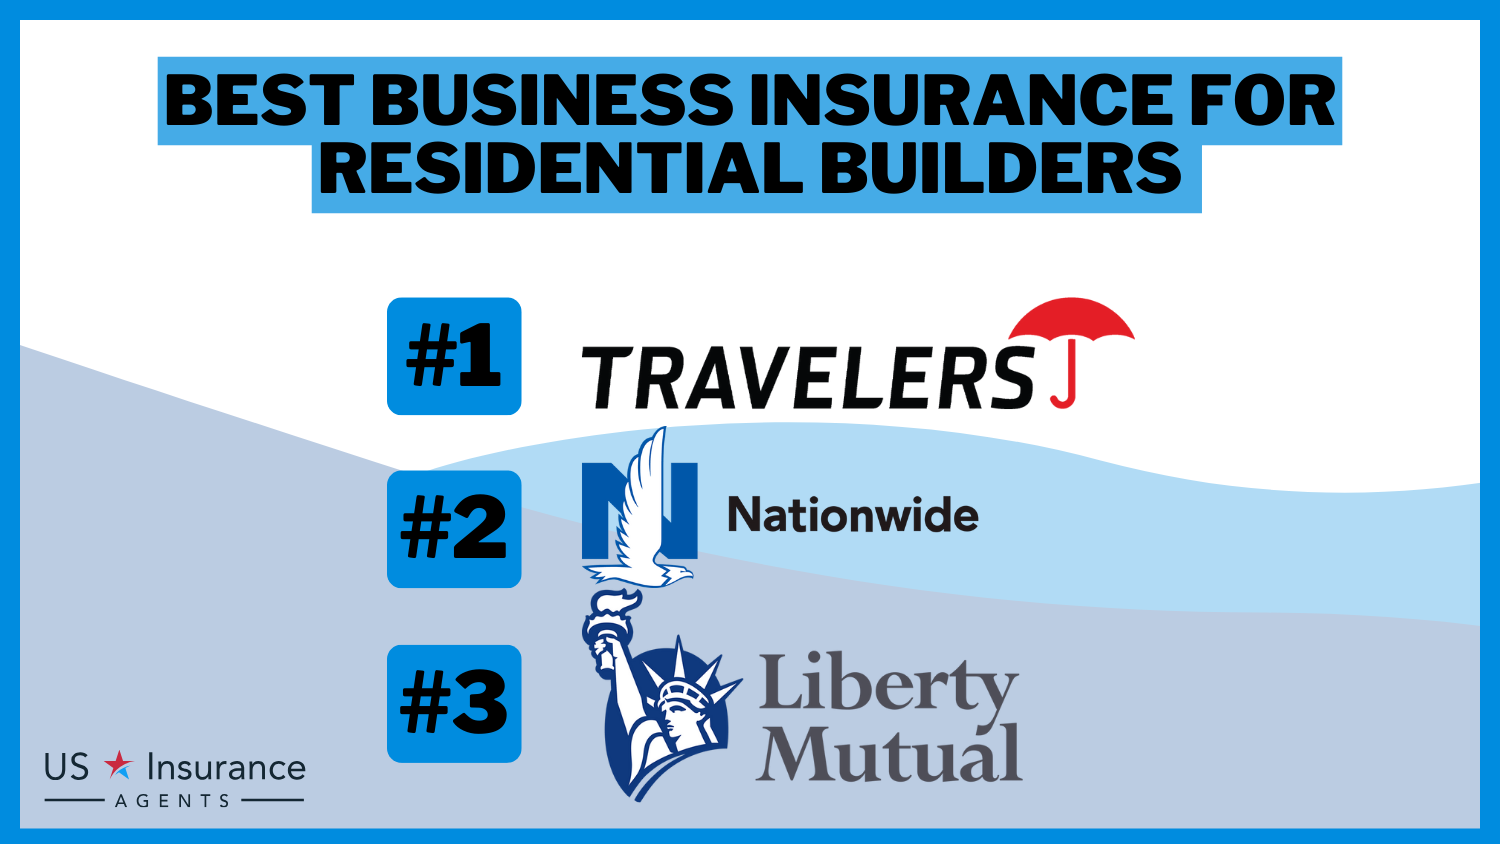 3 Best Business Insurance for Residential Builders: Travelers, Nationwide and Liberty Mutual.